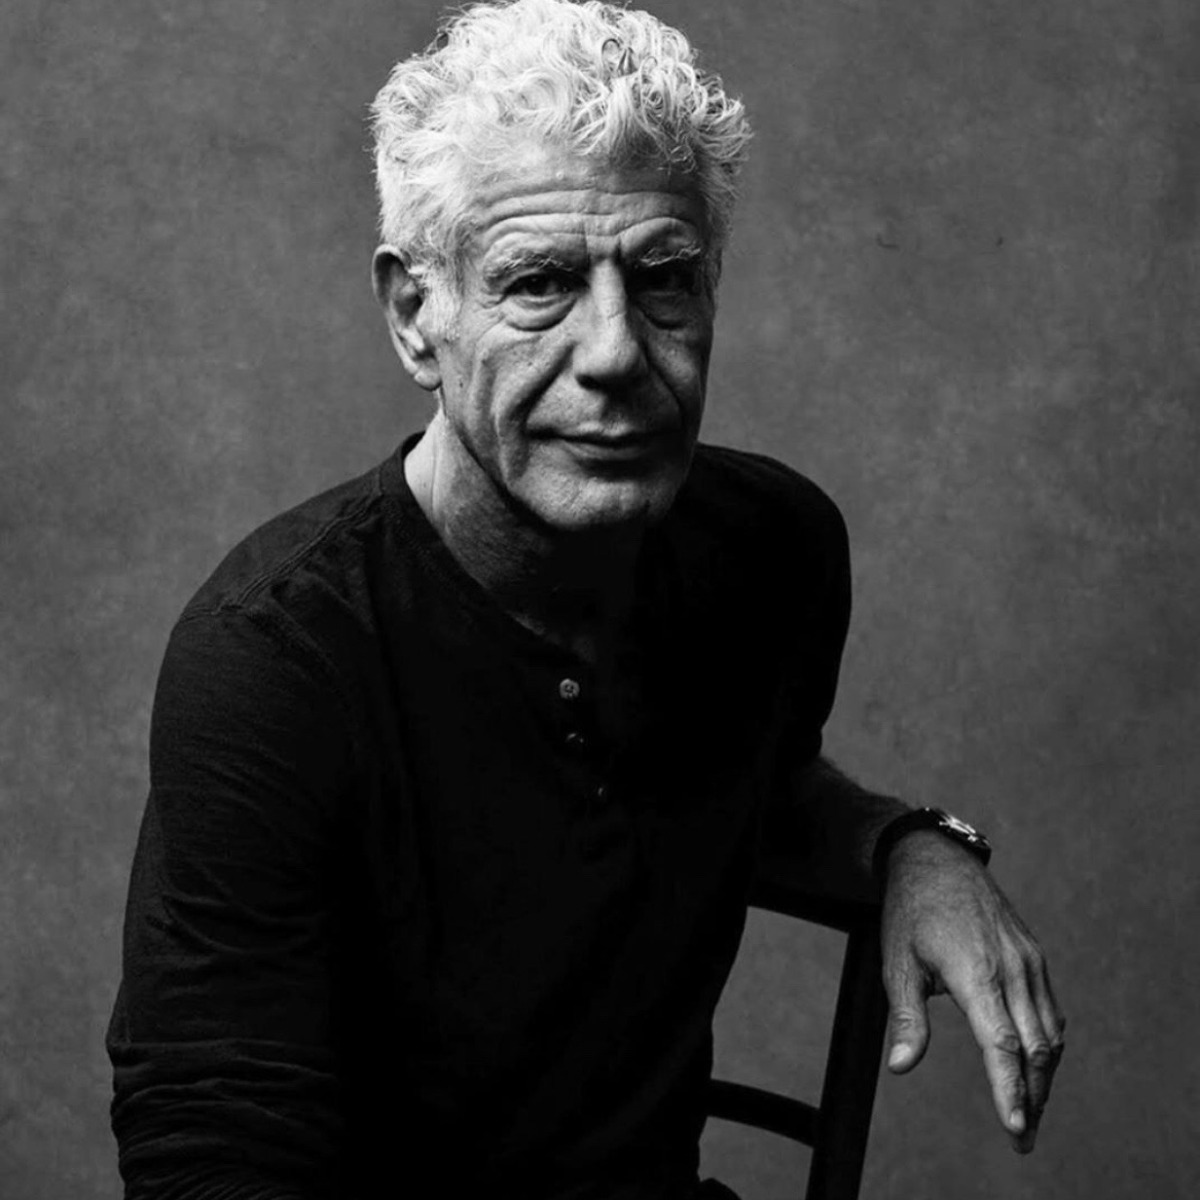 How suicide prevention is becoming part of Anthony Bourdain's legacy